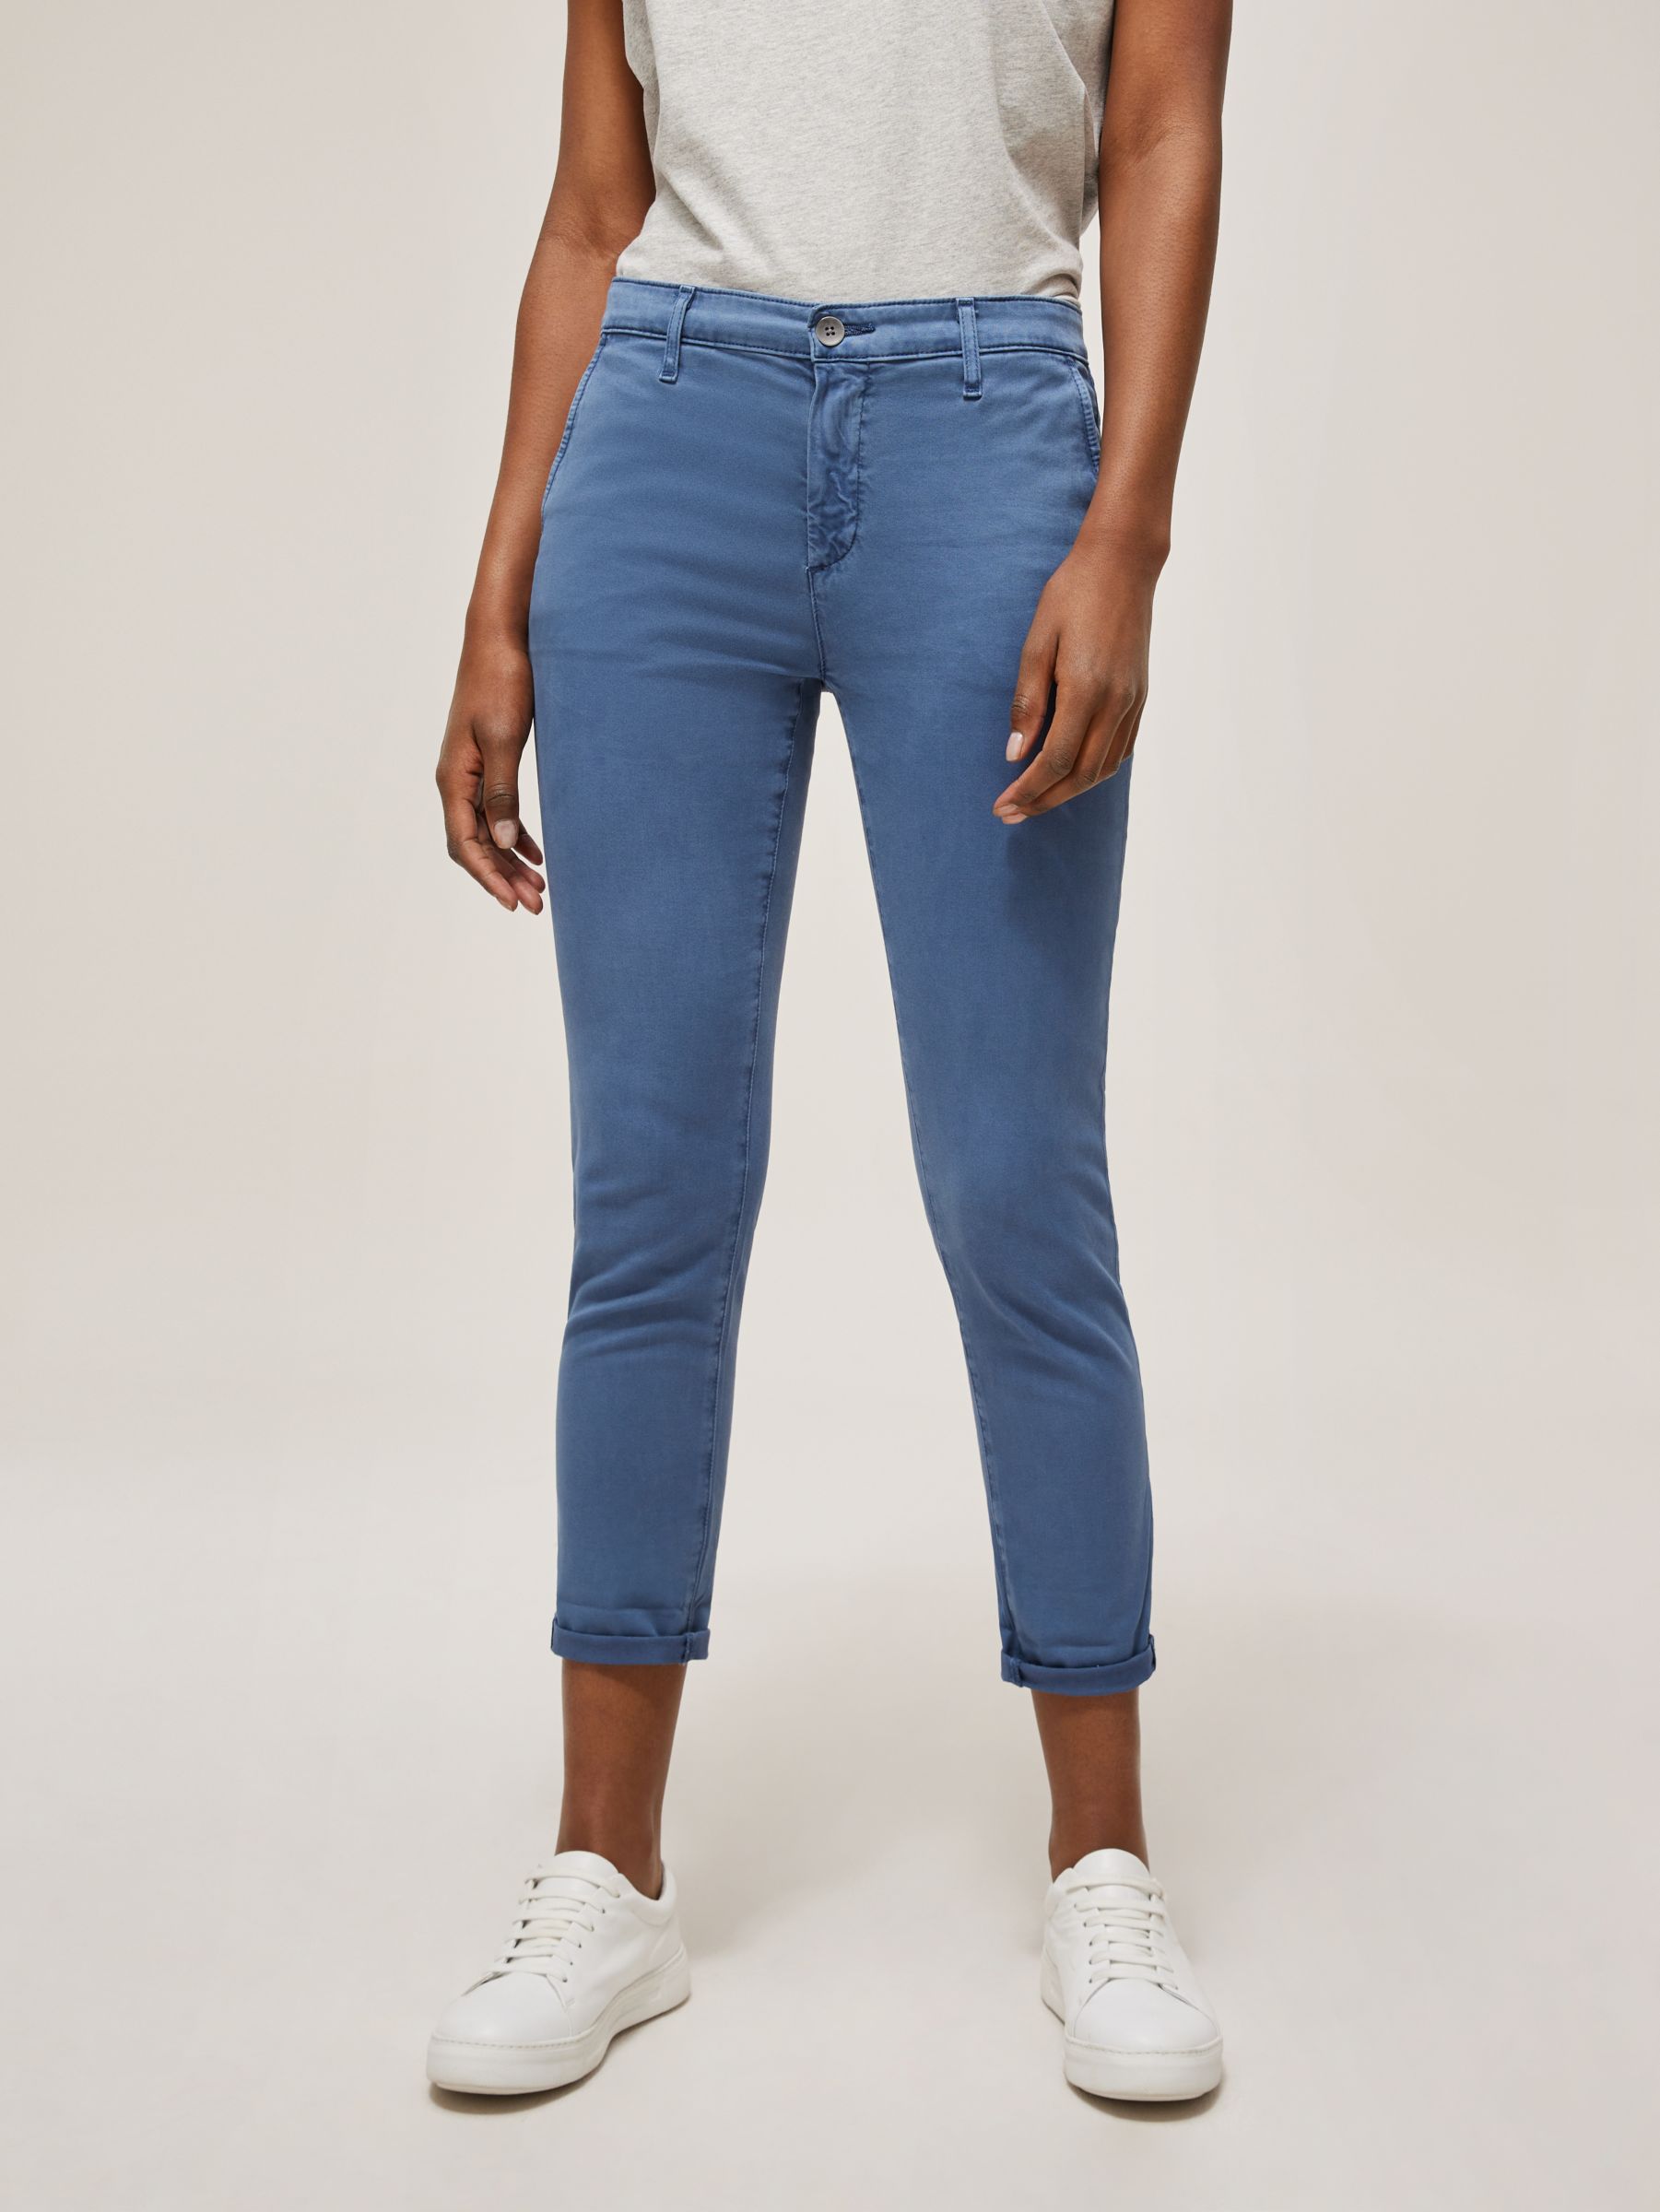 AG Caden Tailored Trousers, Sul Rio Blue at John Lewis & Partners